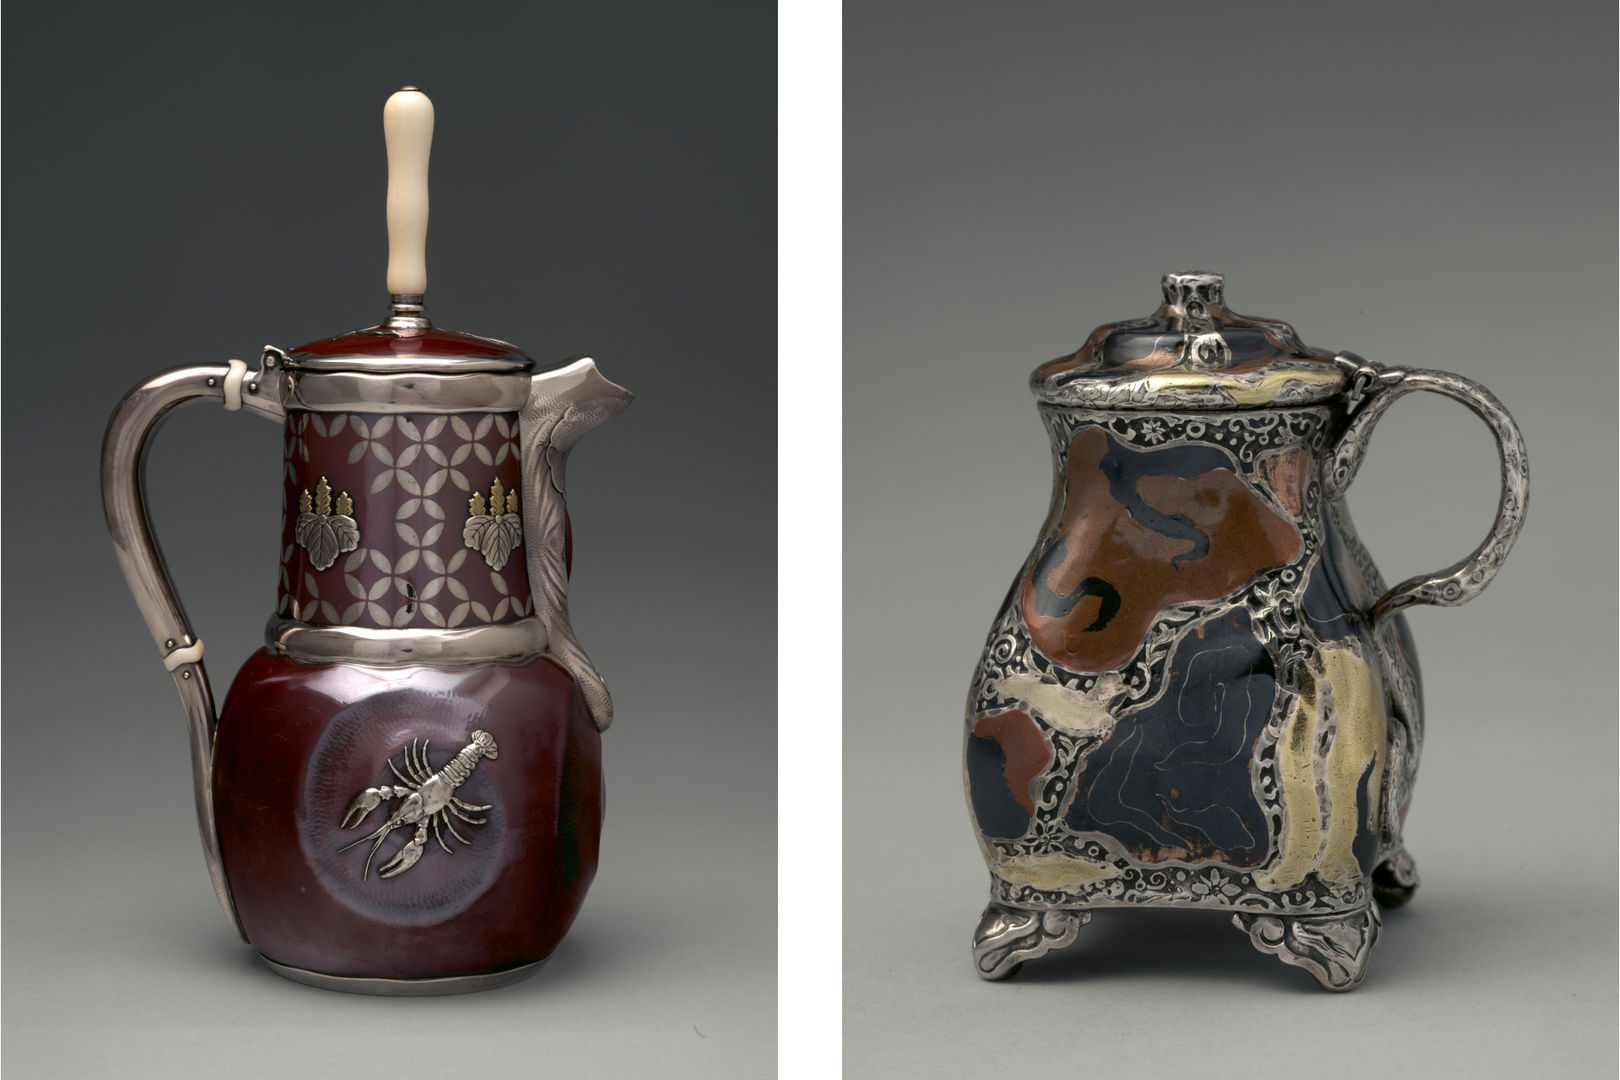 A composite image of a patinated copper and silver chocolate pot and mustard pot. The chocolate pot has a distinct patinated copper surface that has a pebbled shine. The mustard pot has a distinct marbled and patchwork pattern of various metal types adorning the surface.